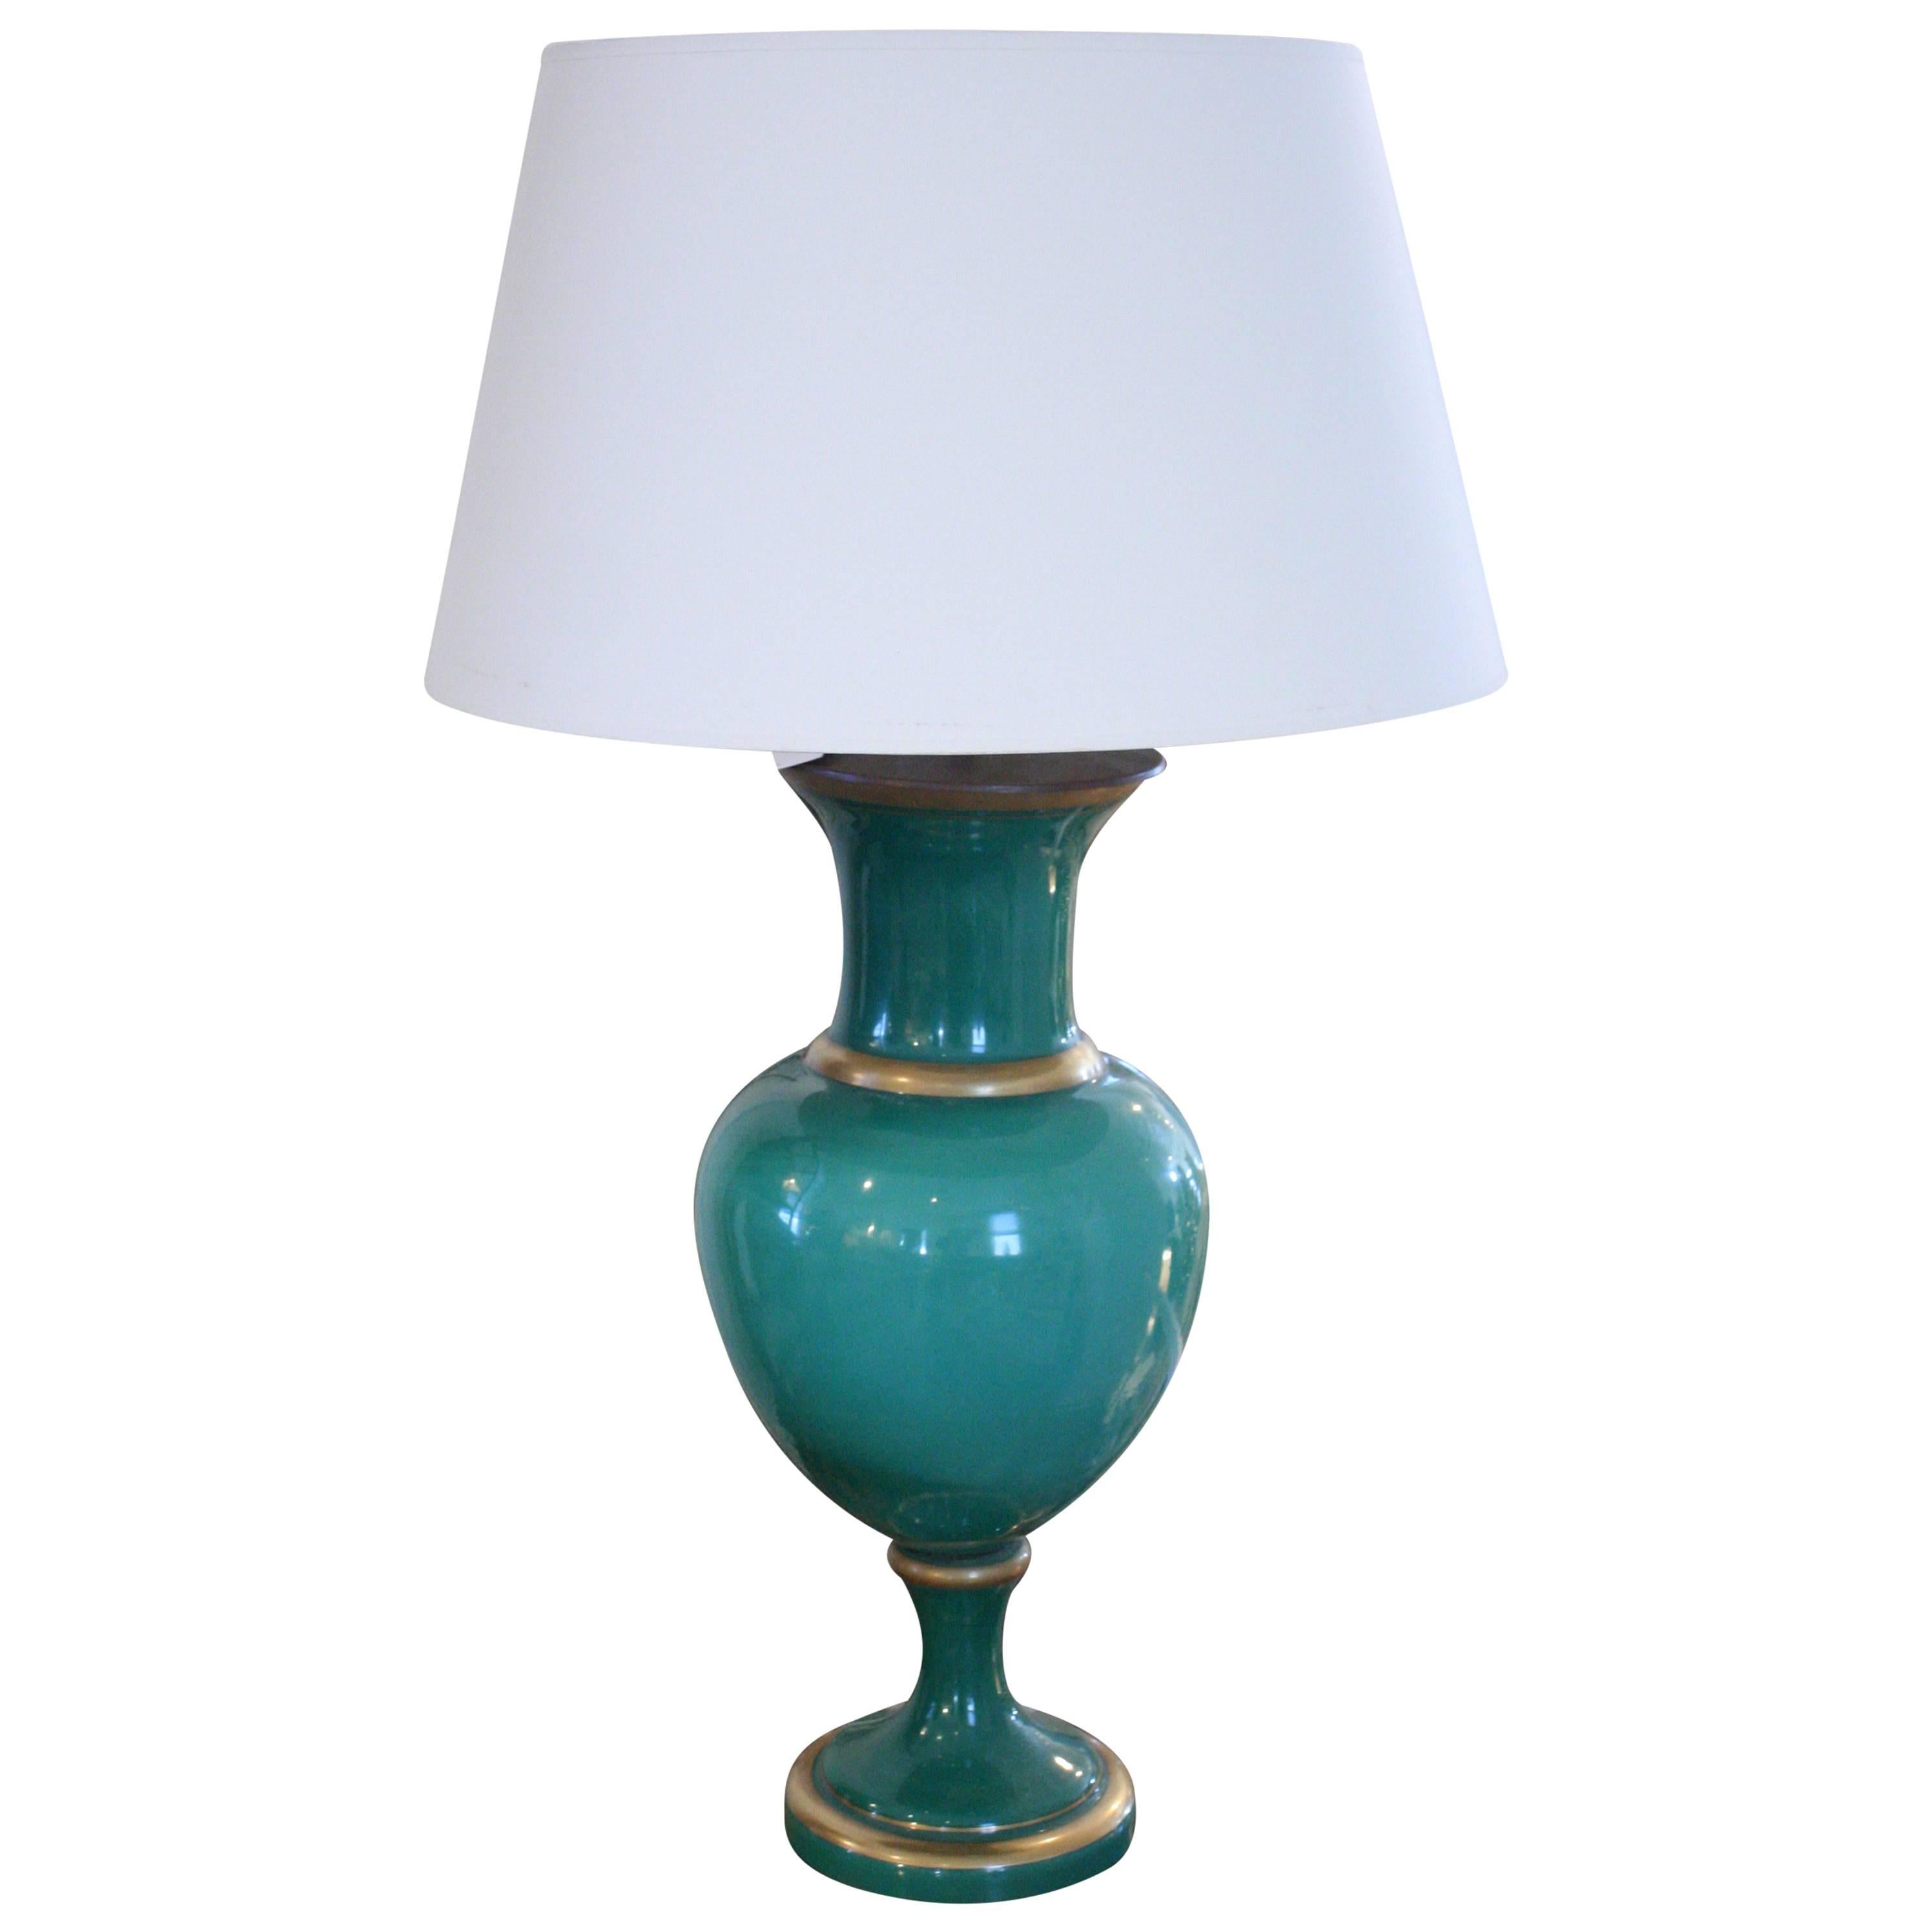 Mid-20th Century Jade Green and Gold Lamp For Sale